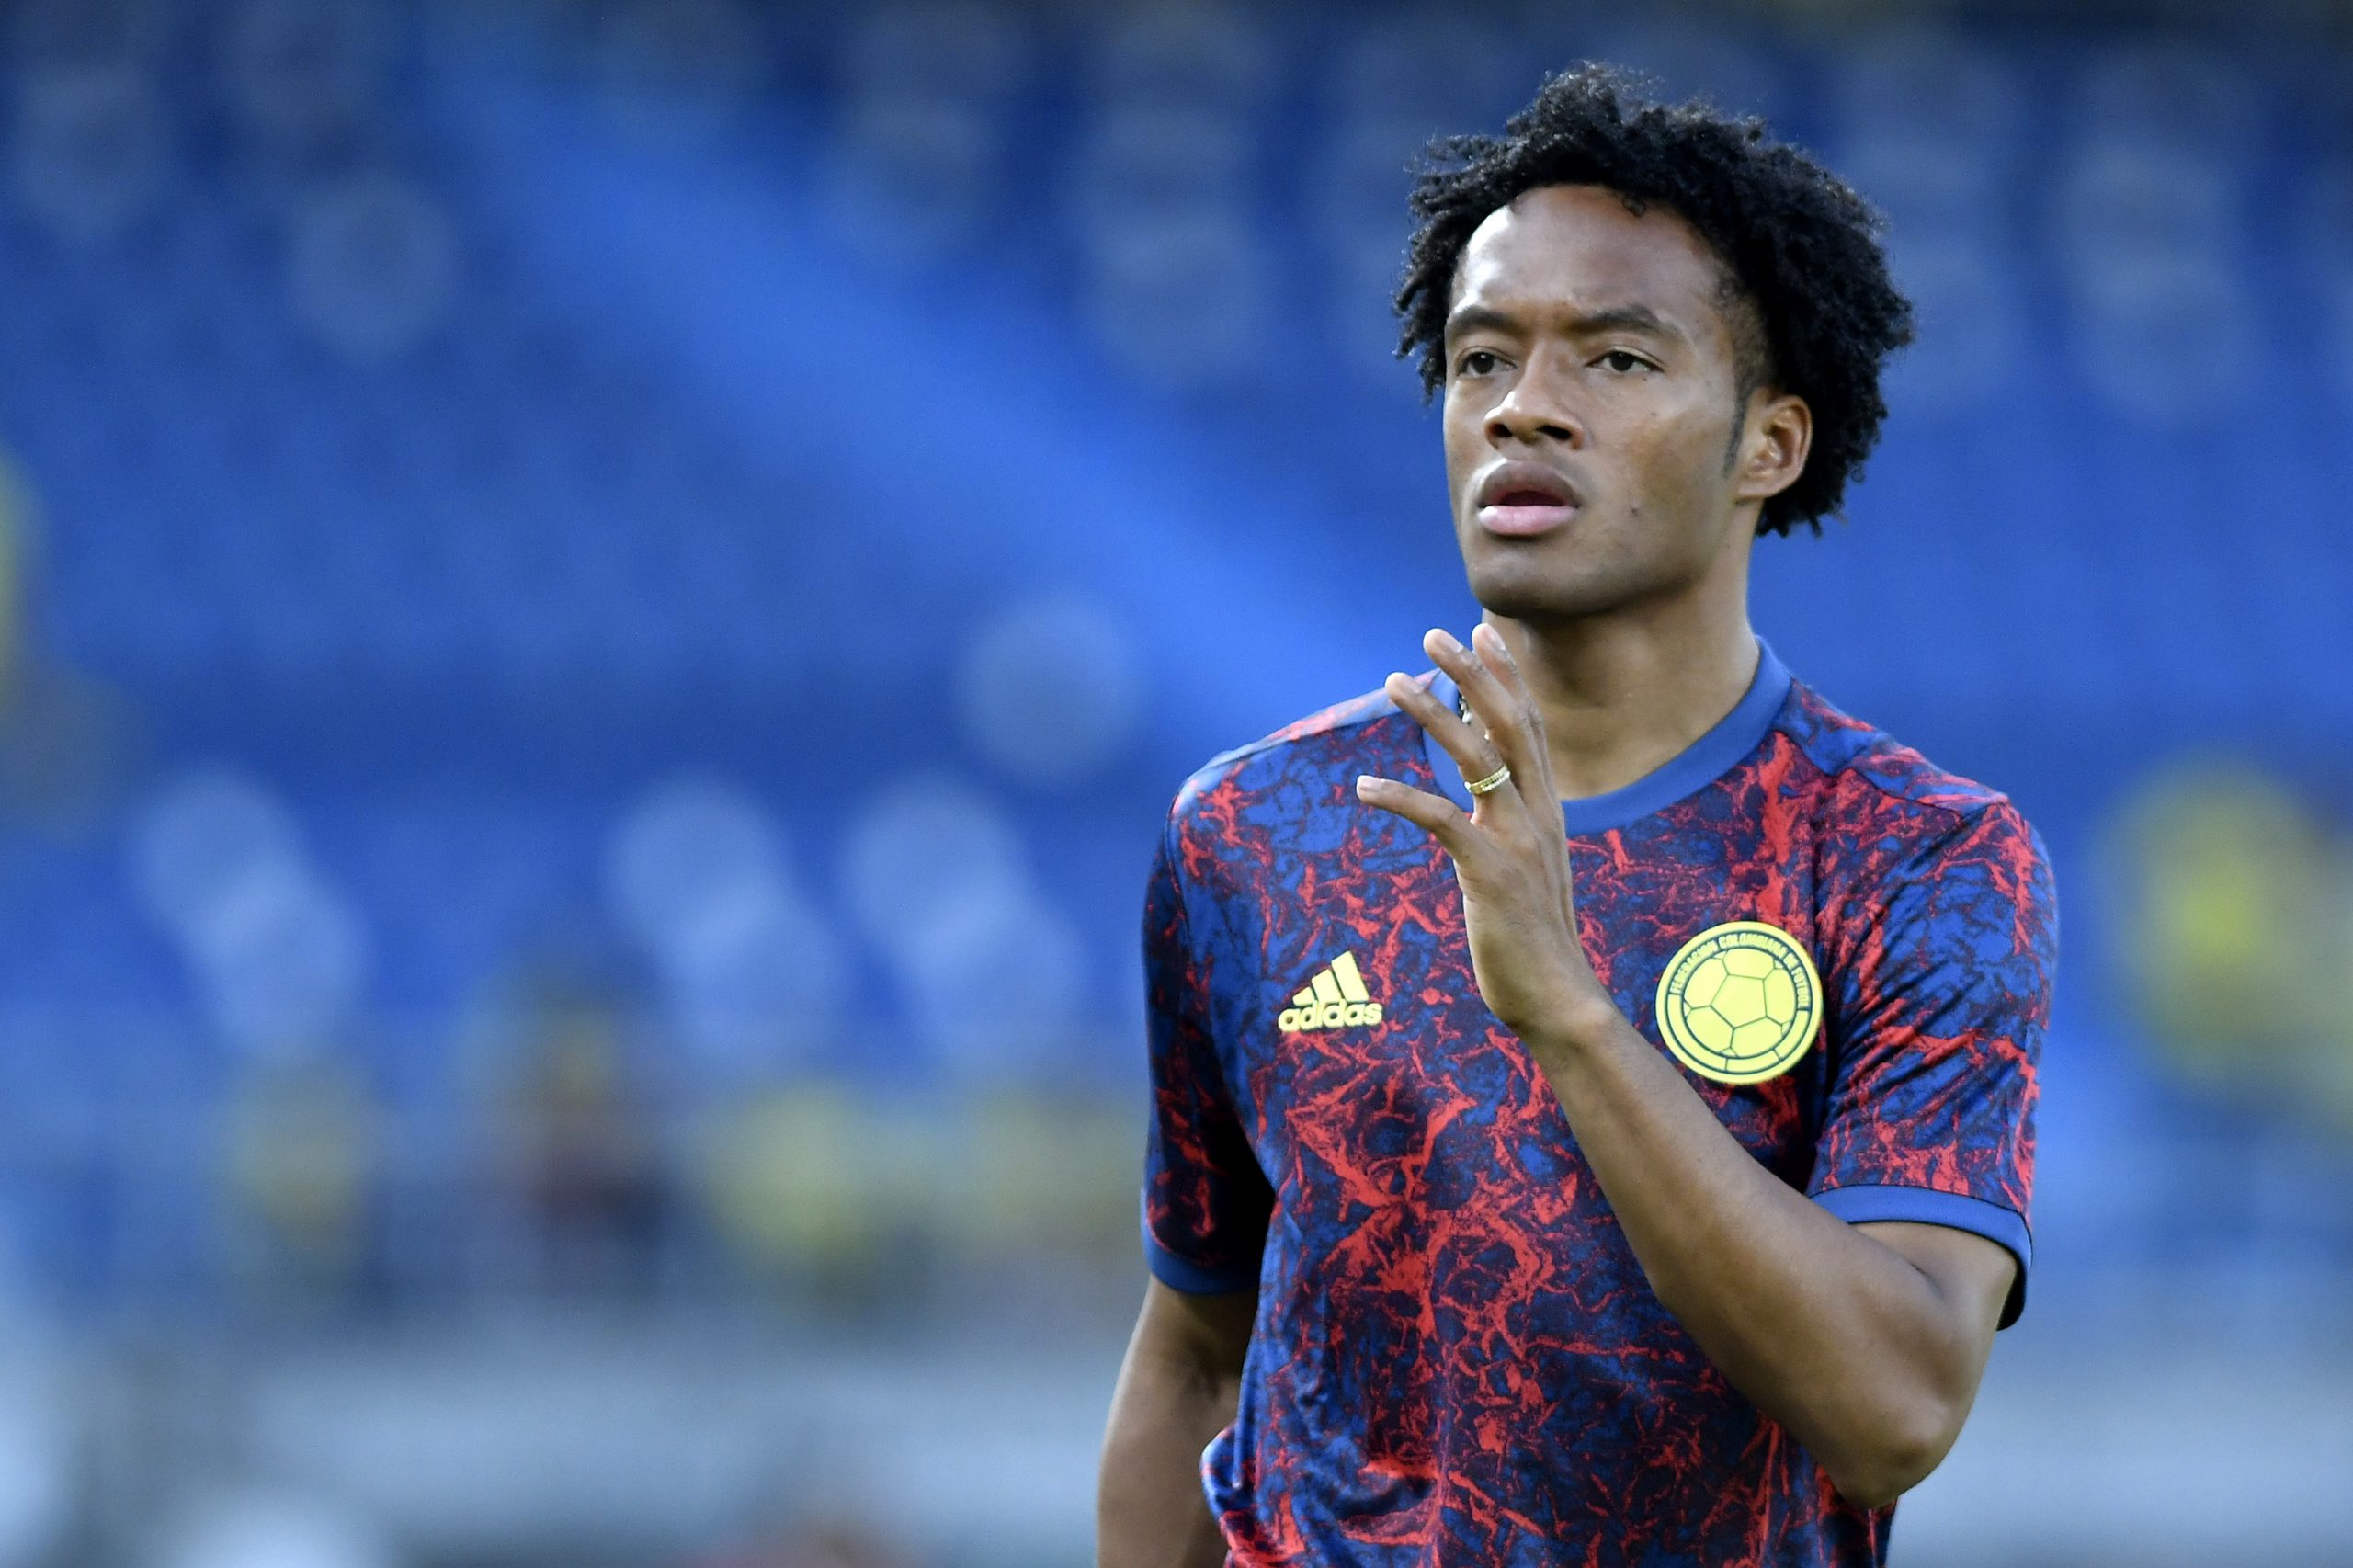 Juan Cuadrado is a star for Juventus and Colombia. (Photo by Gabriel Aponte/Getty Images)